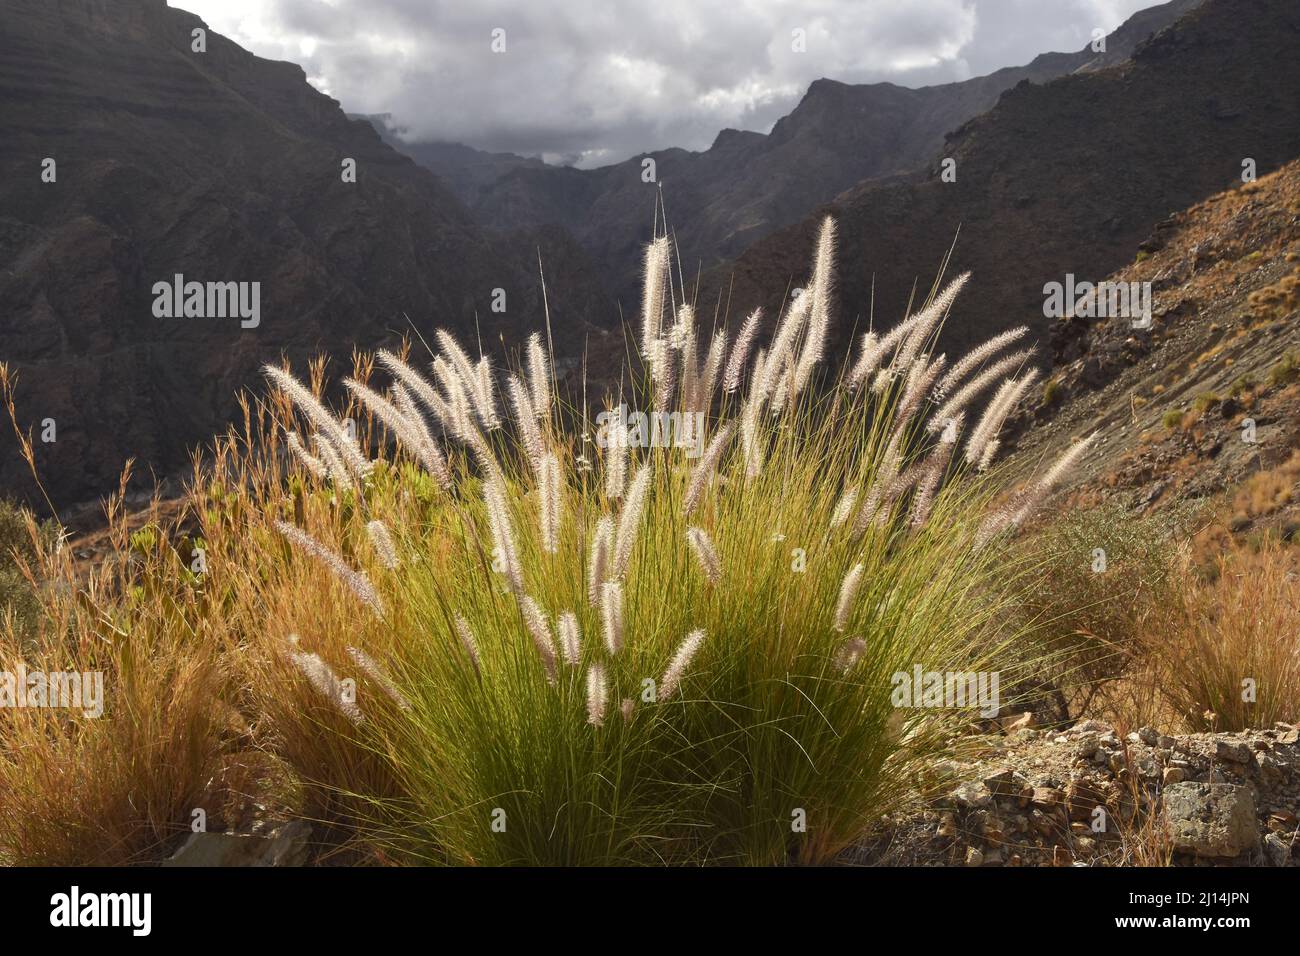 Fountain grass (Pennisetum setaceum) growing in the arid volcanic mountains of northwestern Gran Canaria Canary Islands Spain. Stock Photo